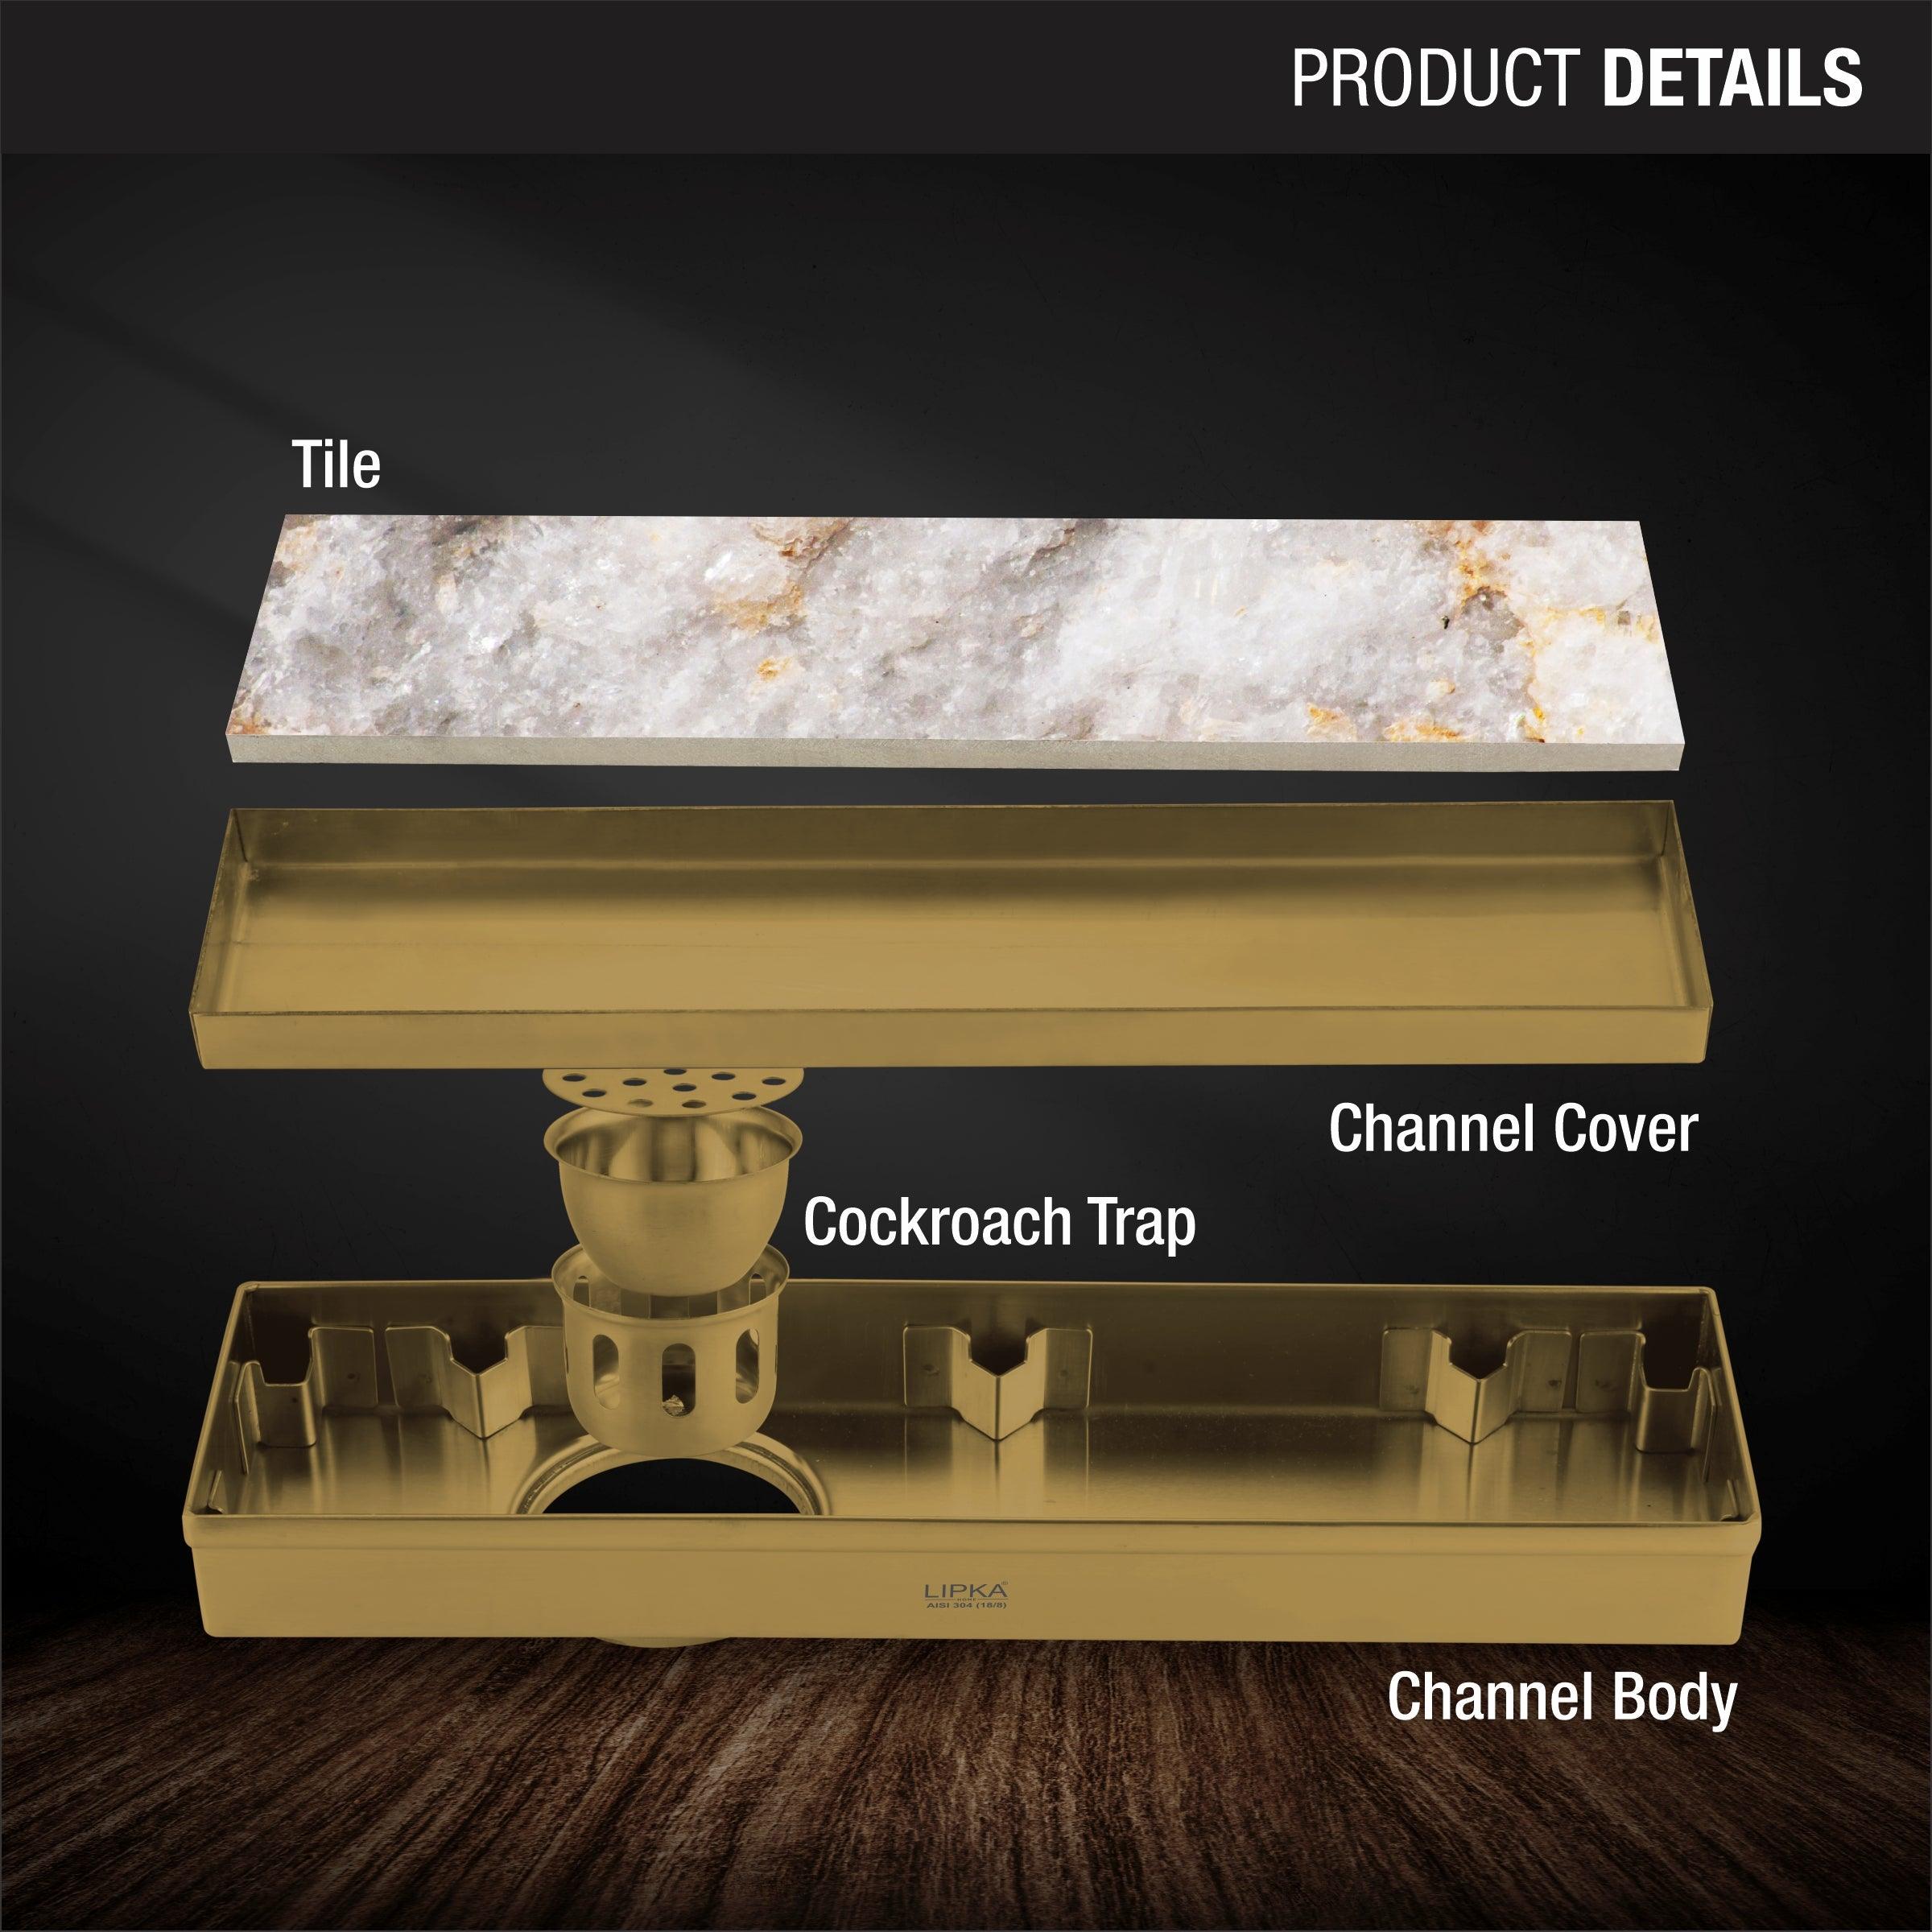 Tile Insert Shower Drain Channel - Yellow Gold (12 x 3 Inches) product details